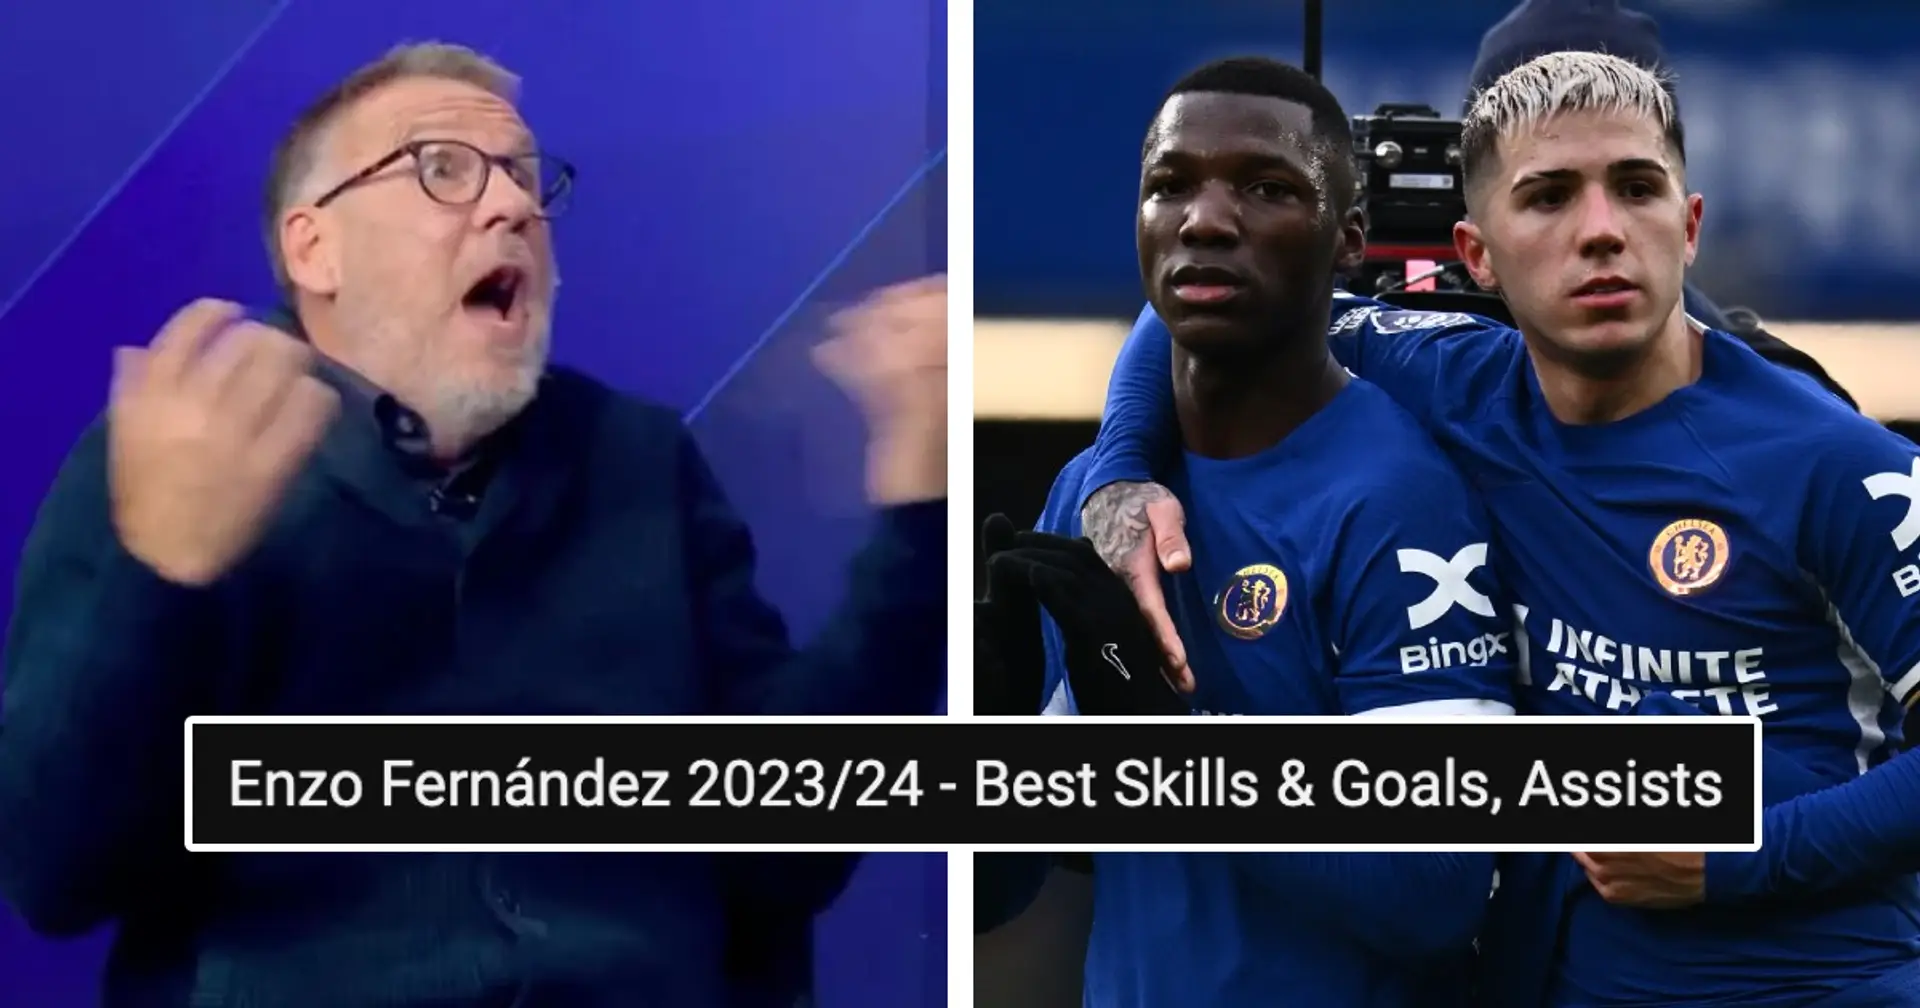 'They see five-minute clips of a player and say we'll take him': Paul Merson labels Chelsea a 'YouTube' team